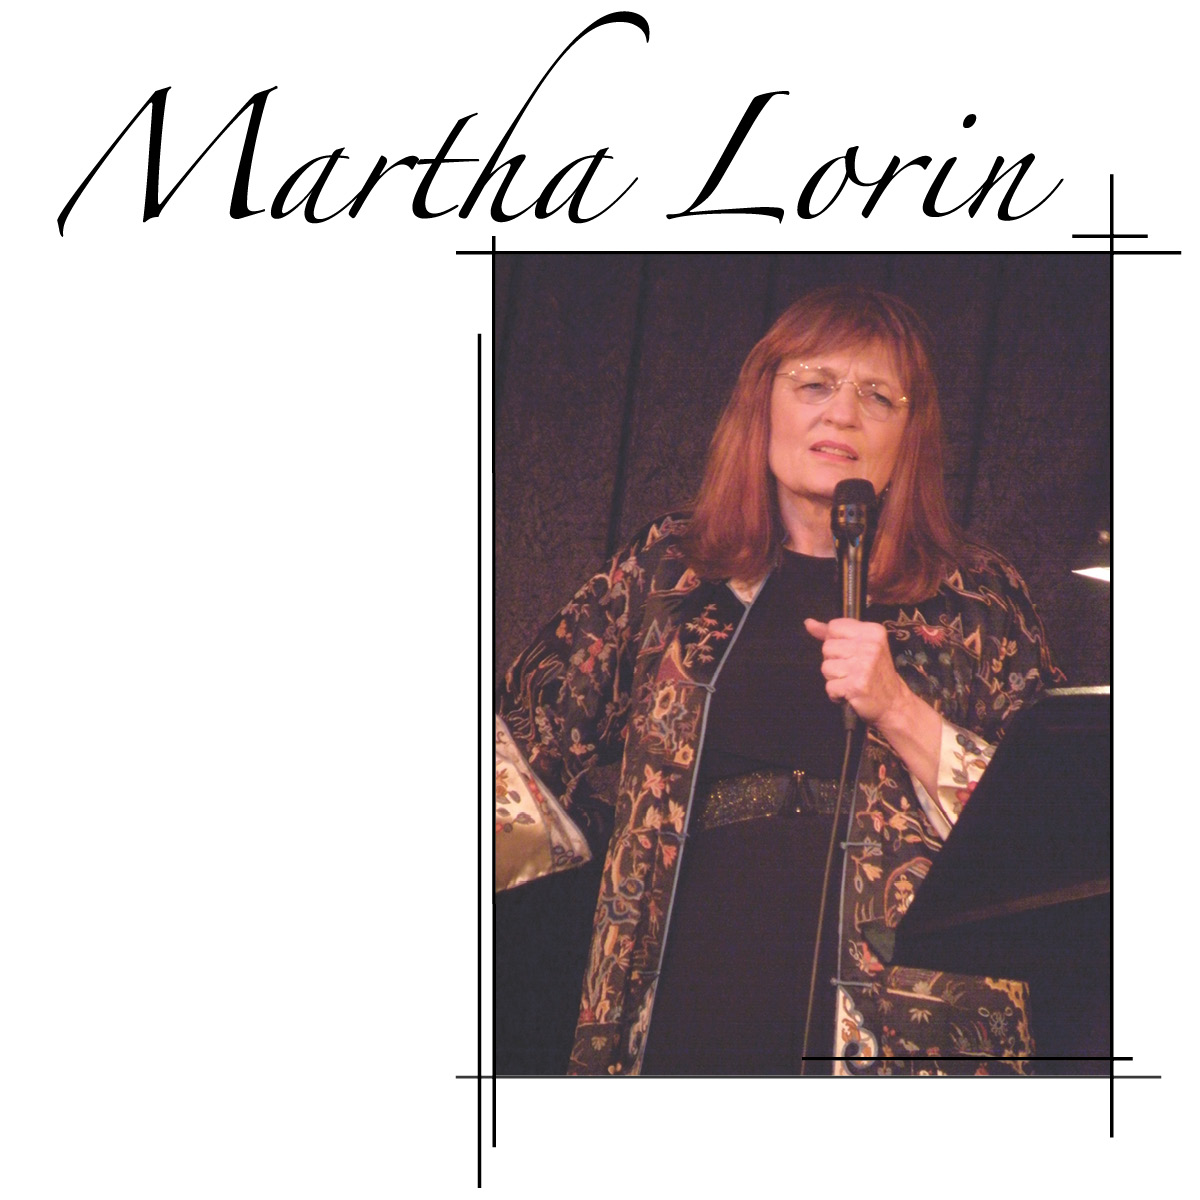 Lampkin Music Group Presents A CELEBRATION OF HAROLD ARLEN Featuring Martha Lorin at DON'T TELL MAMA DEC 18 3 Discover the thrilling songs and stories from many infrequently heard works of musical theater at the cabaret revue I Don’t Remember You: Broadway’s Cult Classics, vol. II, performed at Davenport’s Piano Bar & Cabaretfrom January 12-26, 2015. Reservations can be placed at www.davenportspianobar.com. 